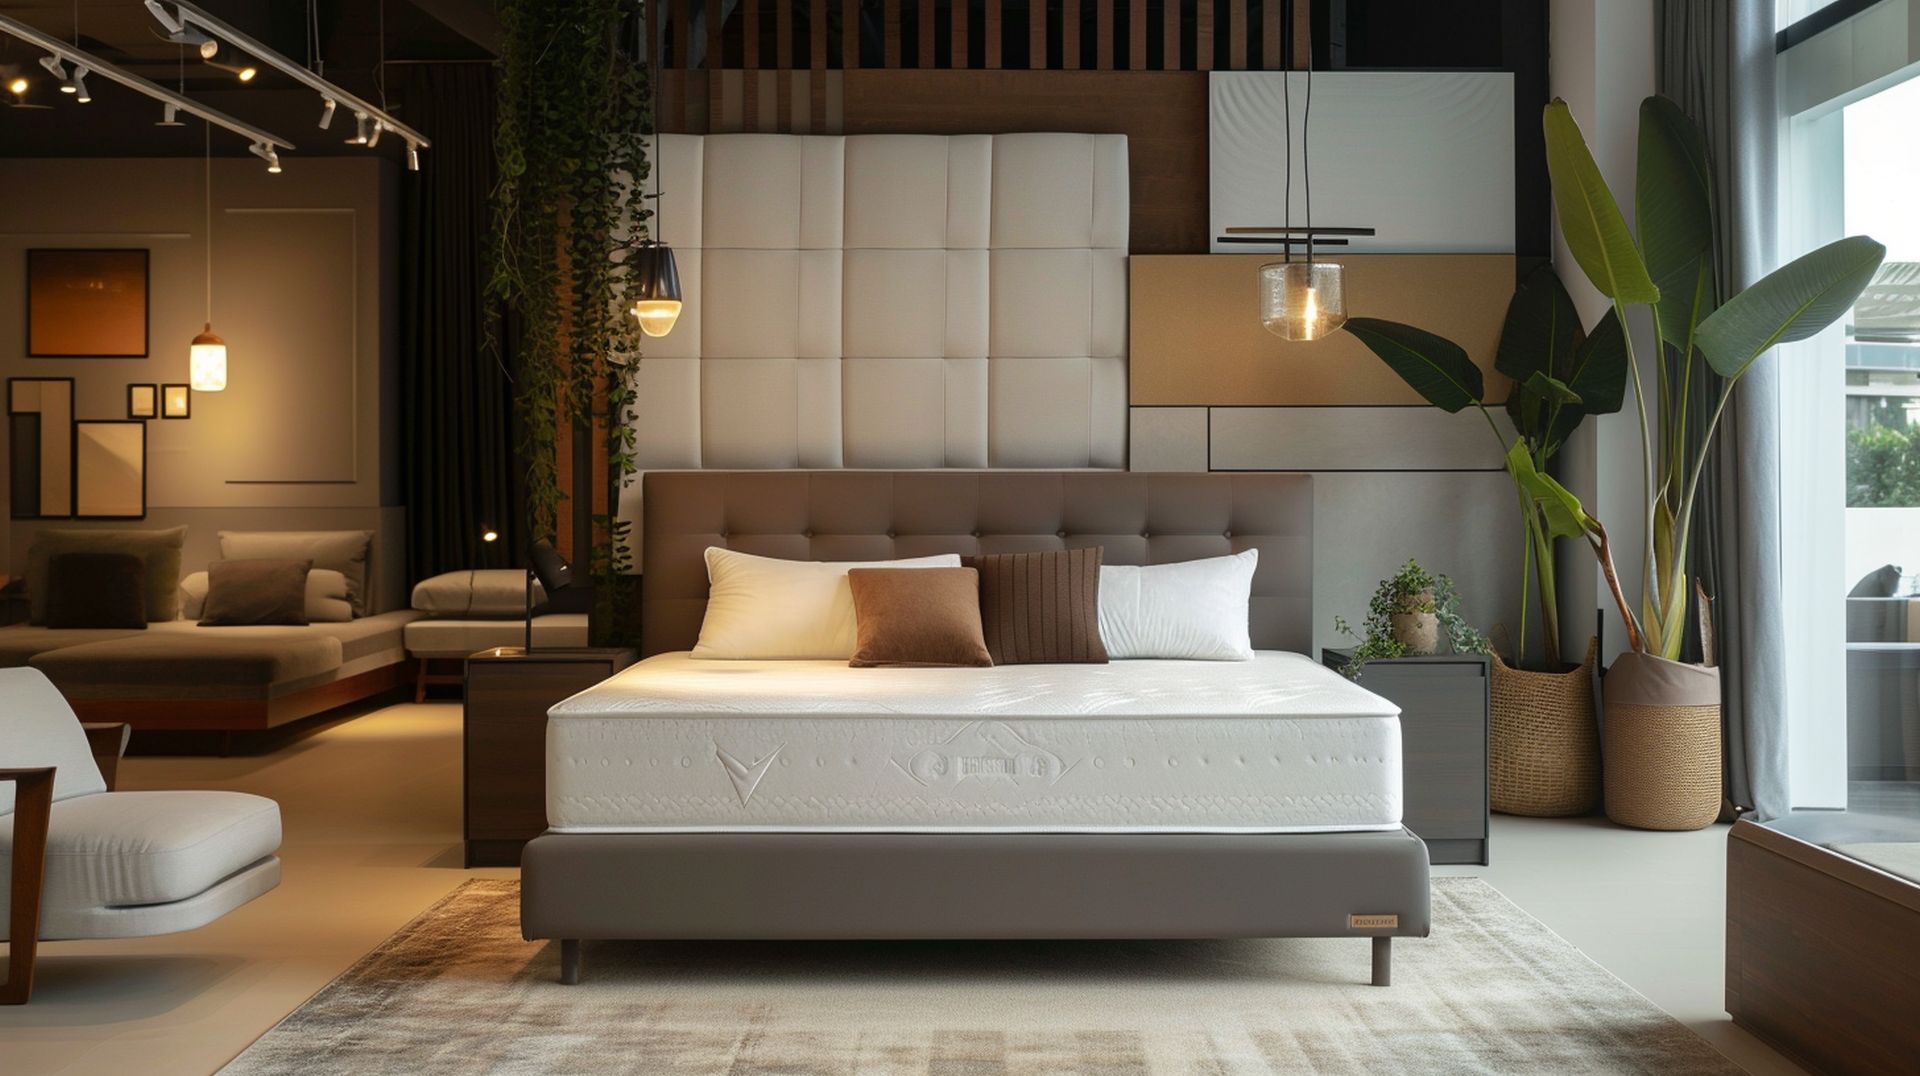 If you're looking for a new bed, mattress stores in Laguna Niguel offer the best customer and delivery service, financing, and warranties in California